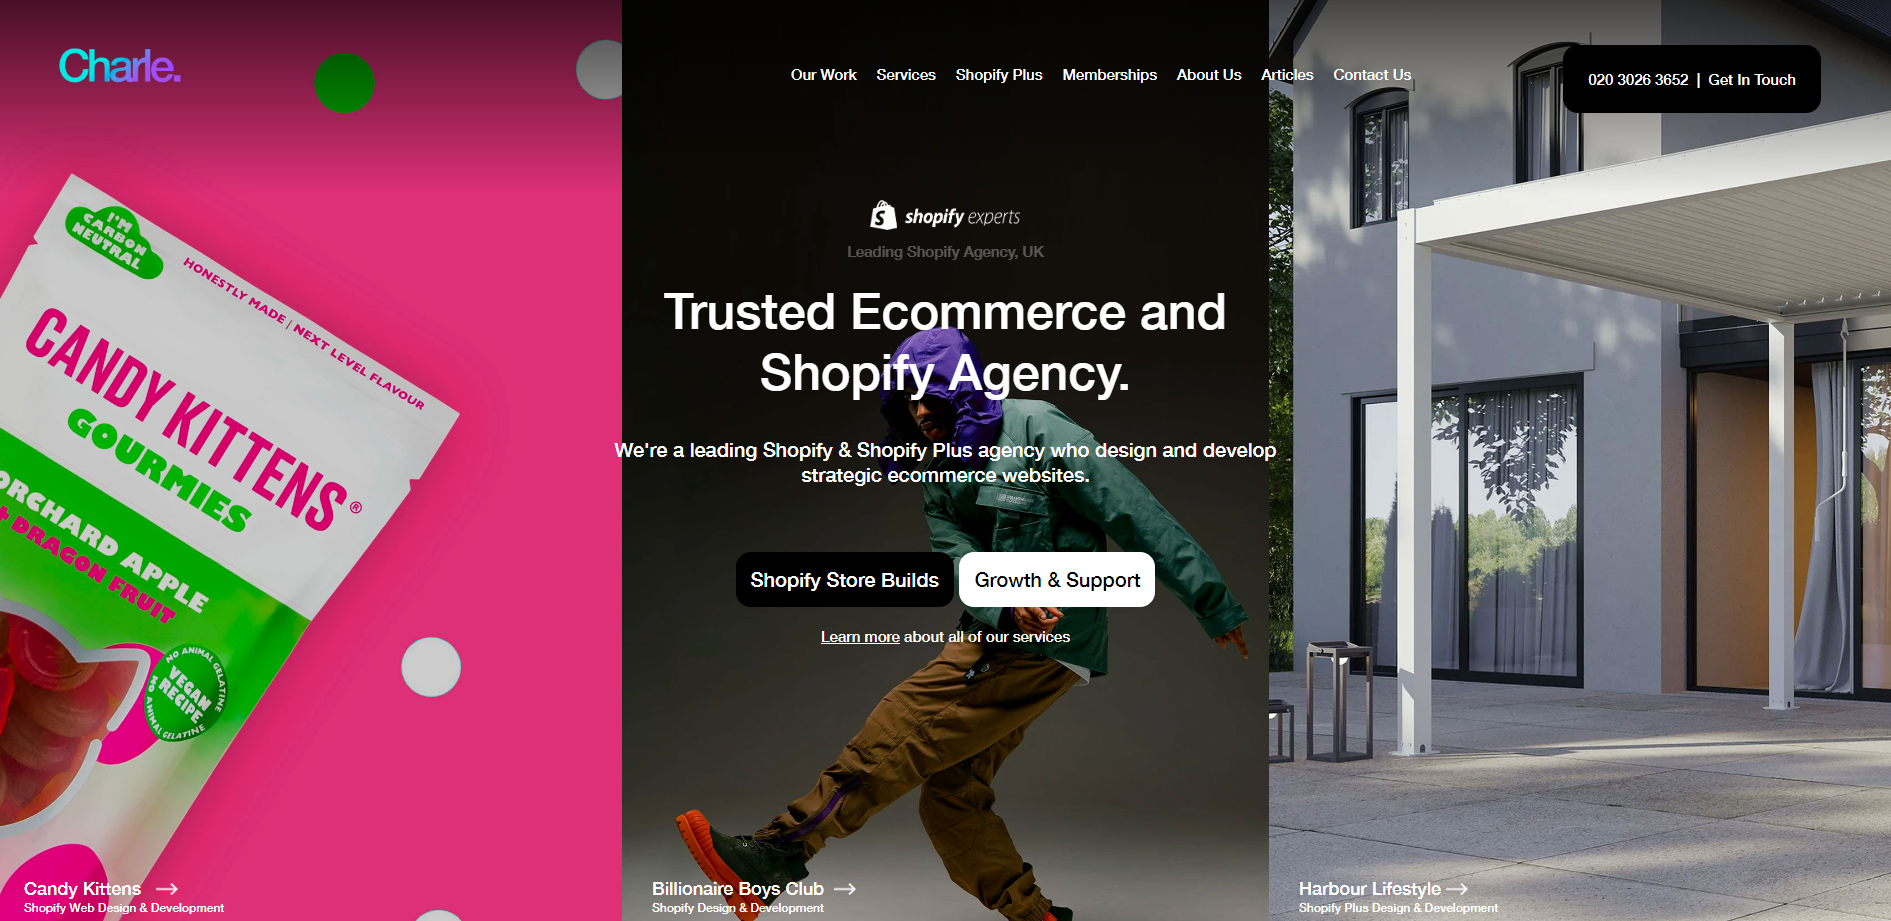 Charle Shopify Agency homepage